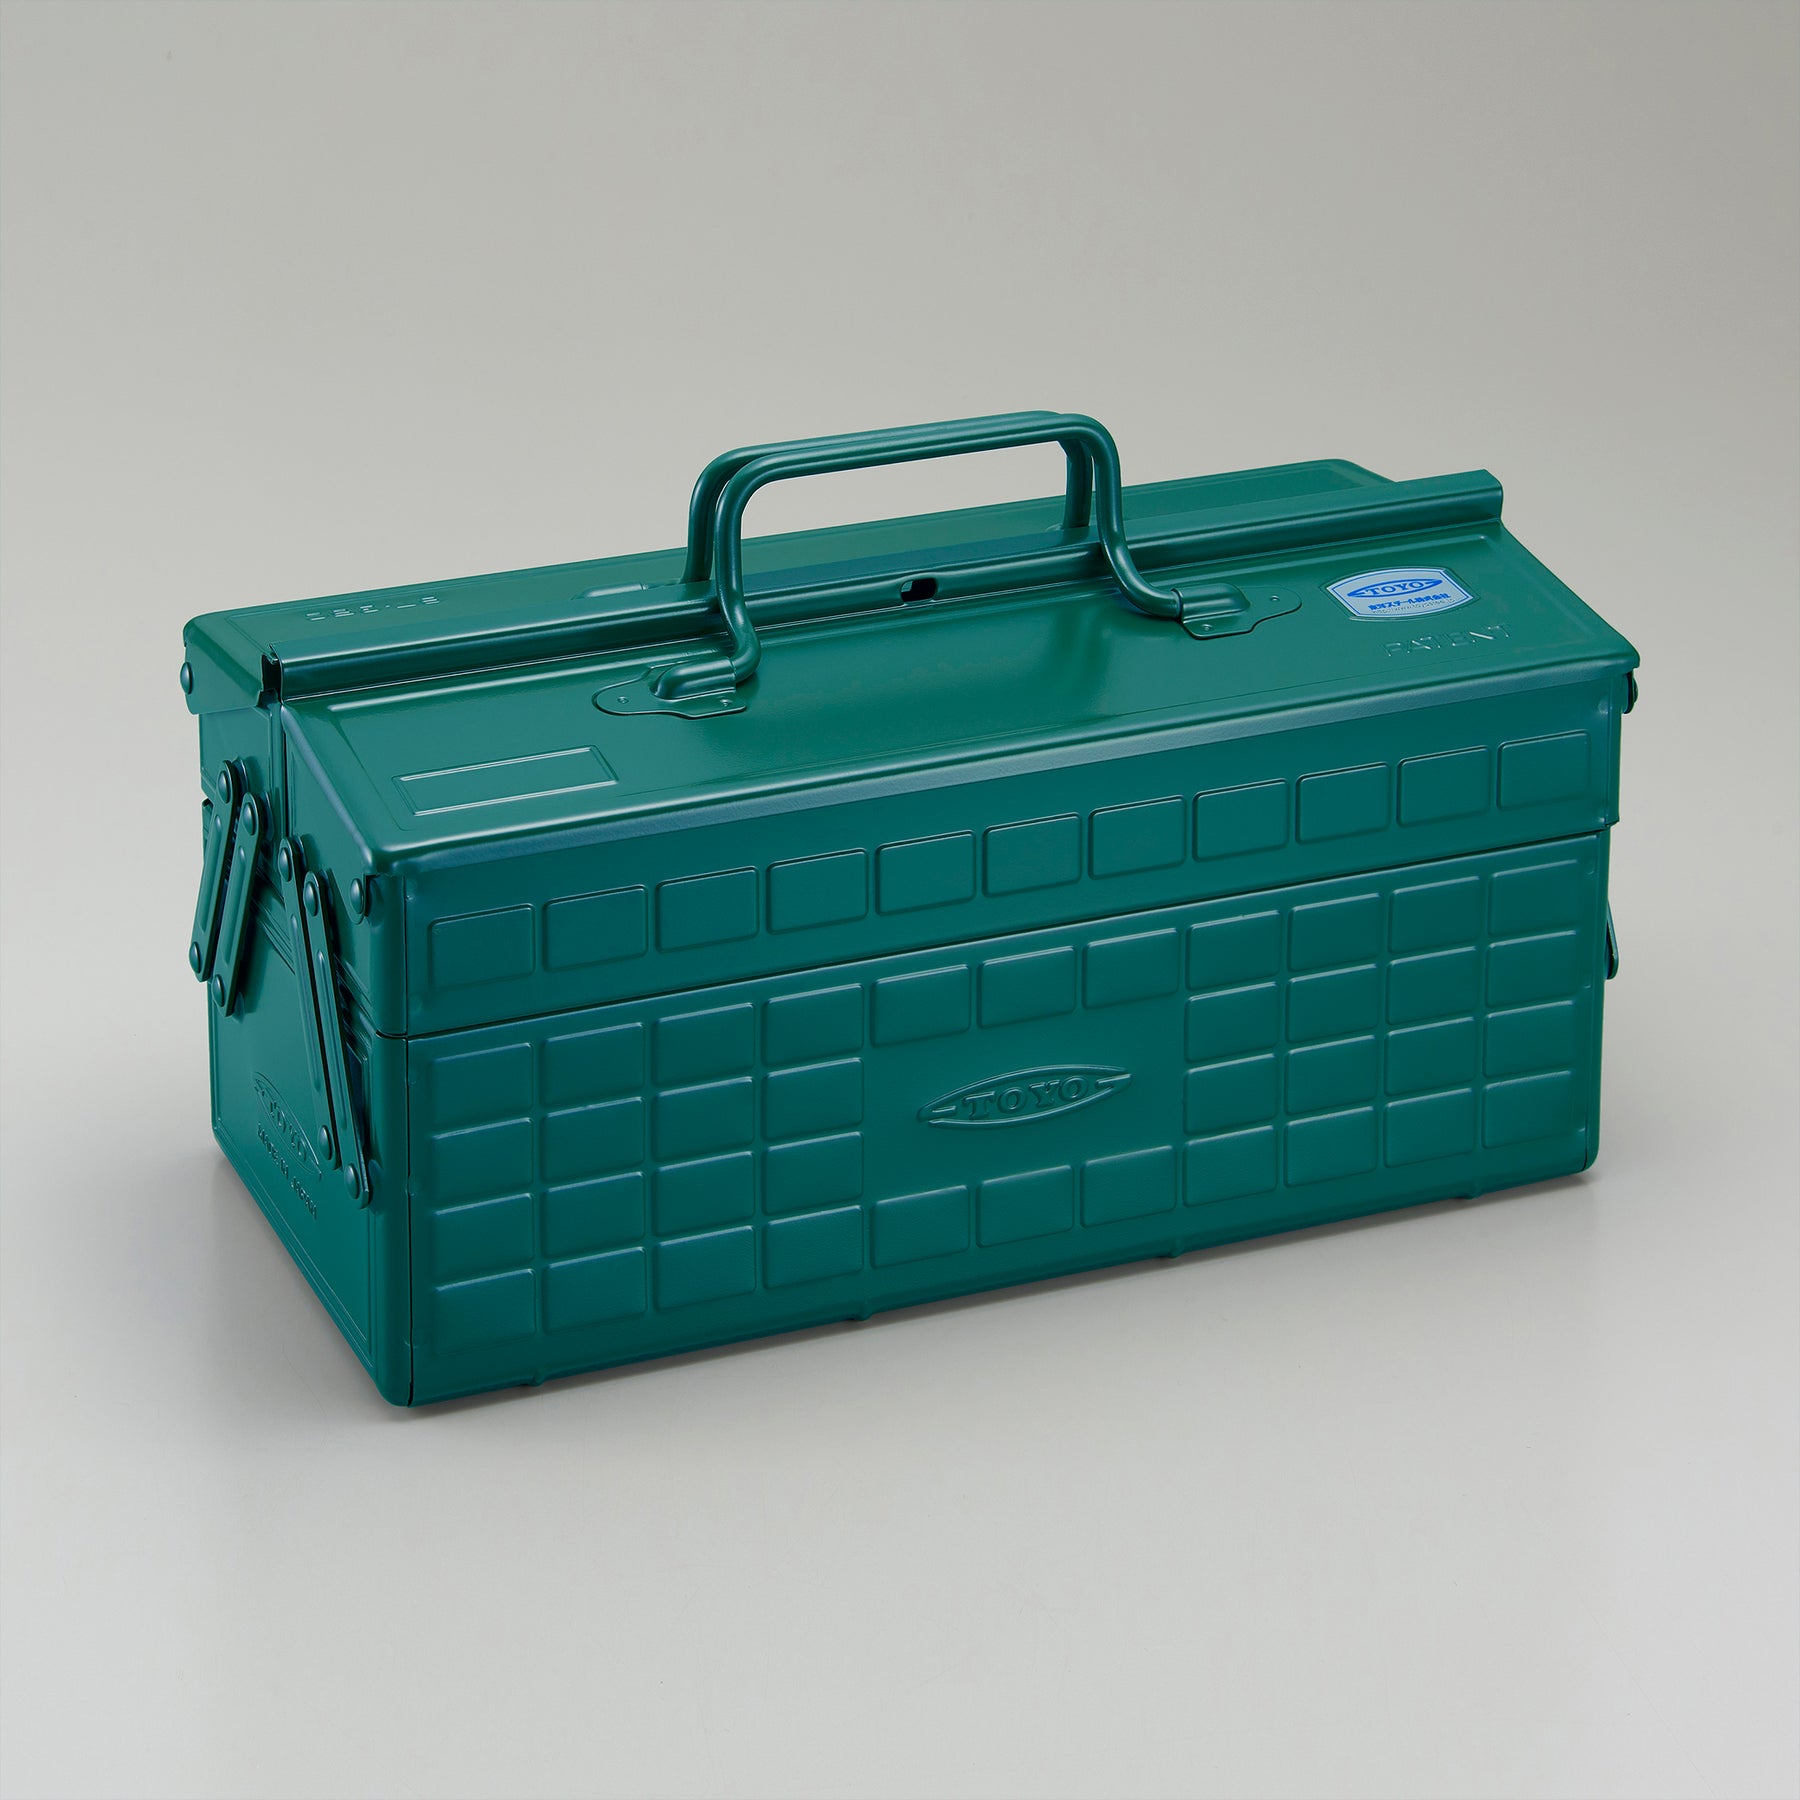 AMEICO - Official US Distributor of Toyo - Steel Toolbox with Cantilever  Lid and Upper Storage Trays, style ST-350